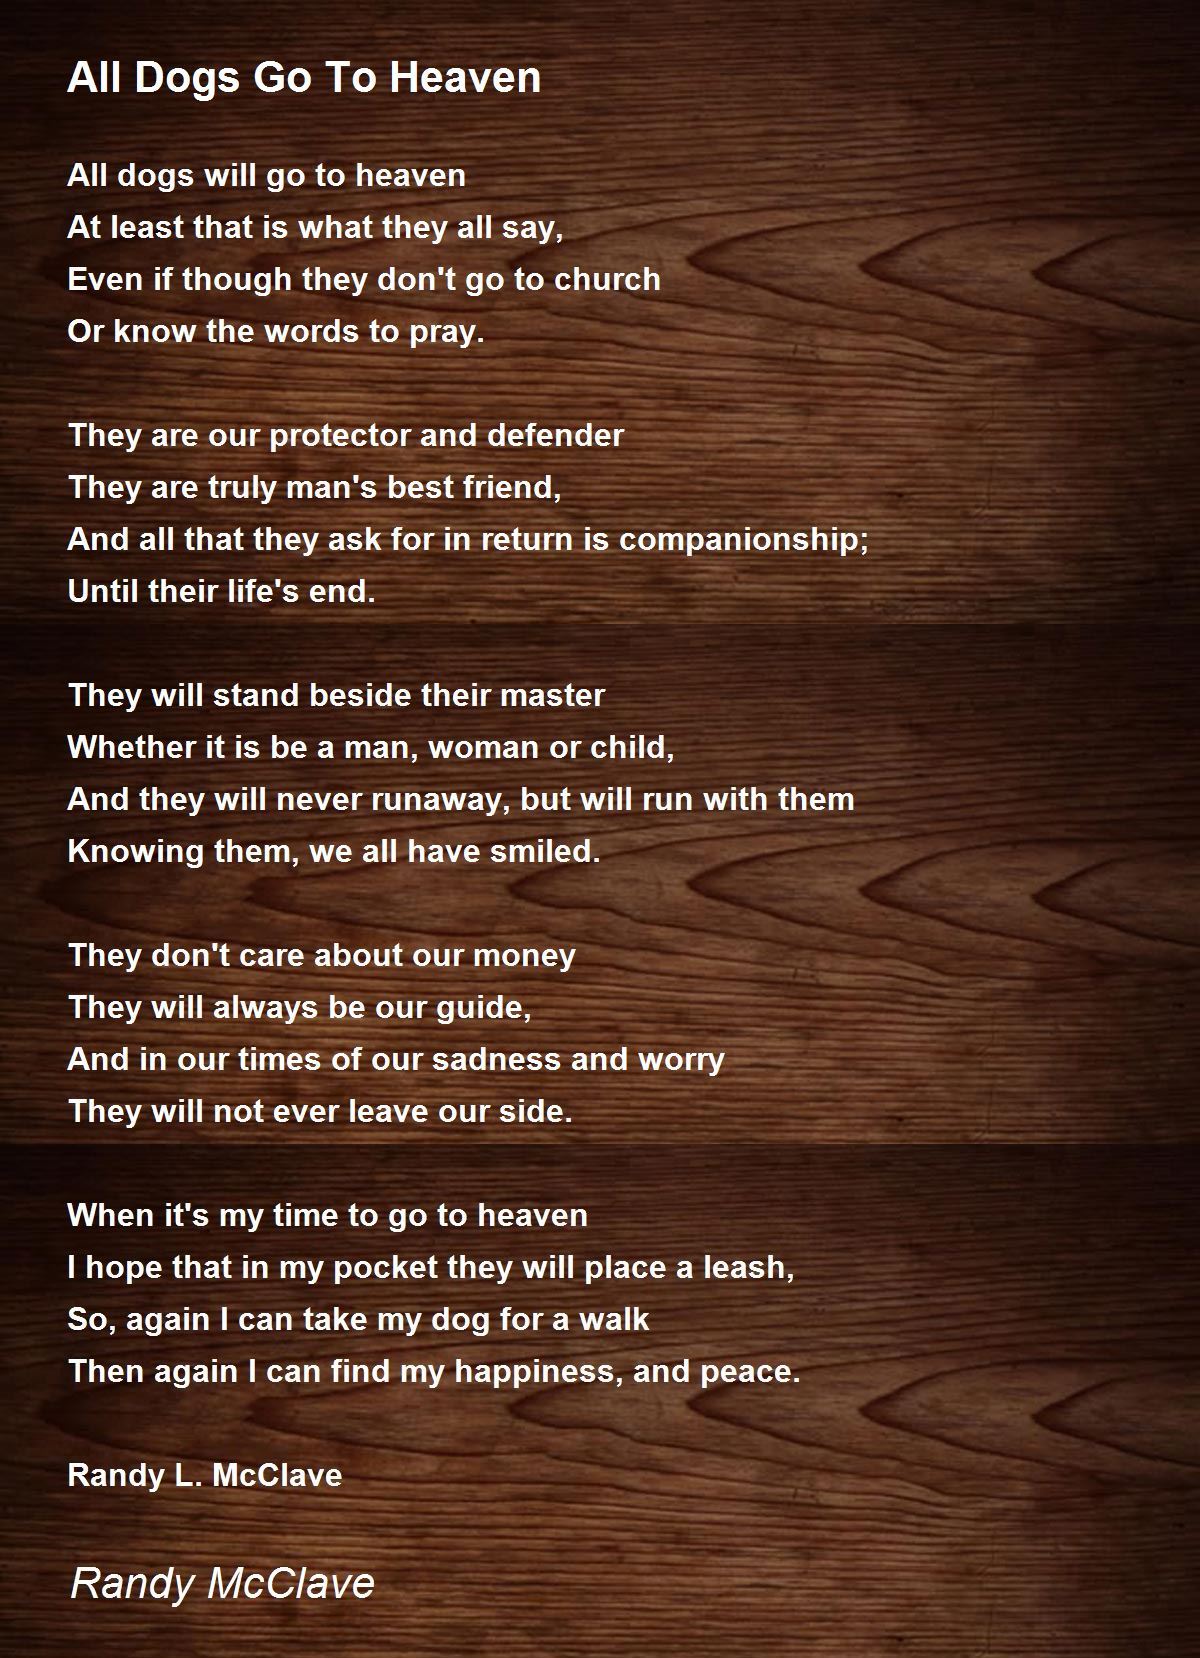 All Dogs Go To Heaven - All Dogs Go To Heaven Poem by Randy McClave